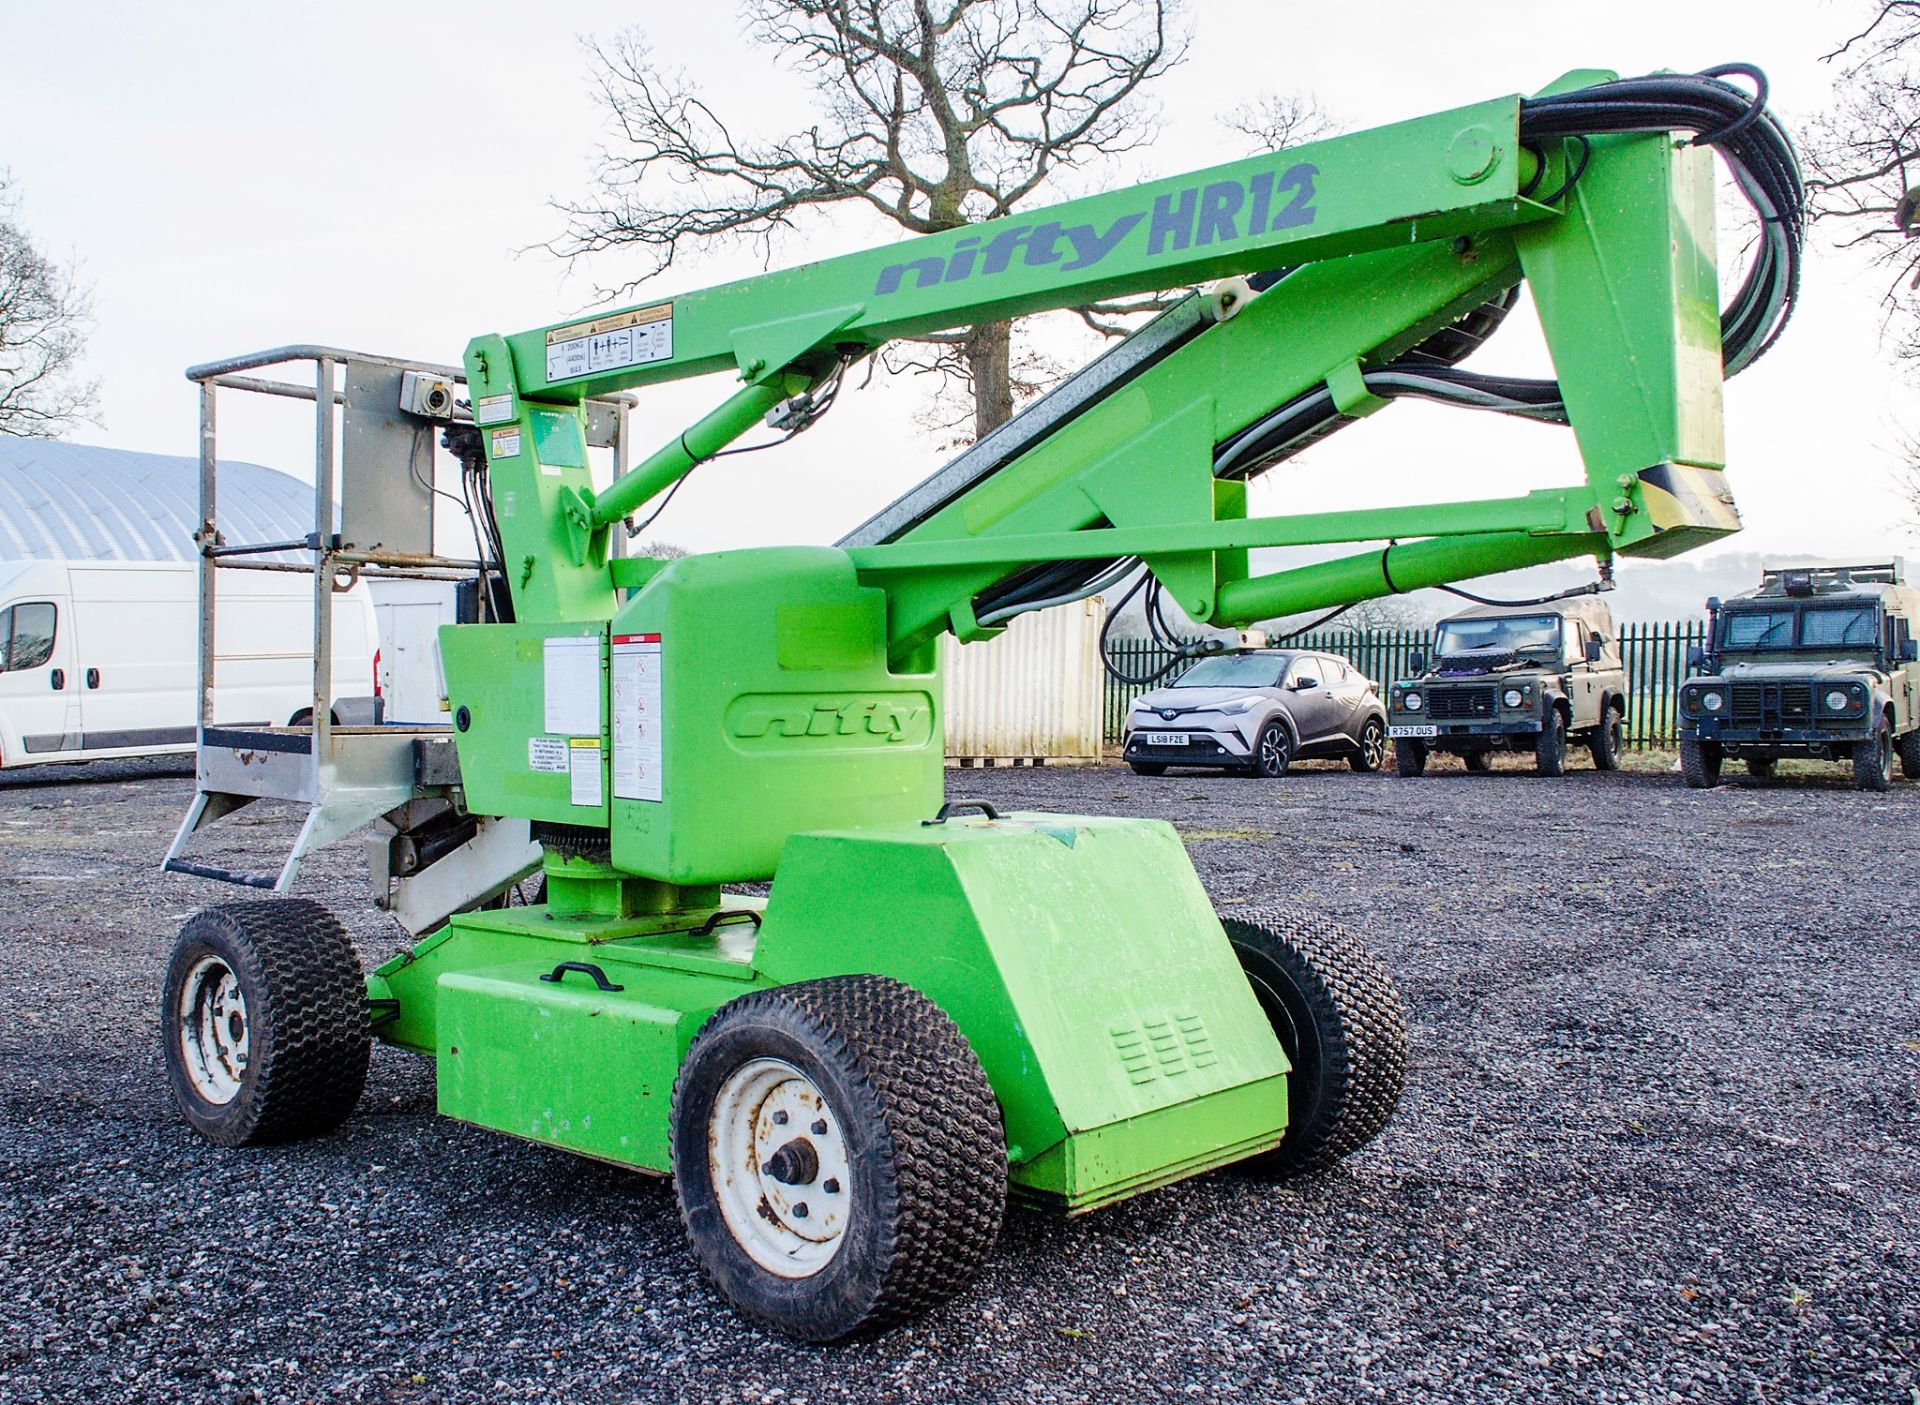 Nifty HR12 battery electric/diesel articulated boom lift access platform Year: 2007 S/N: 16530 SHC - Image 4 of 18